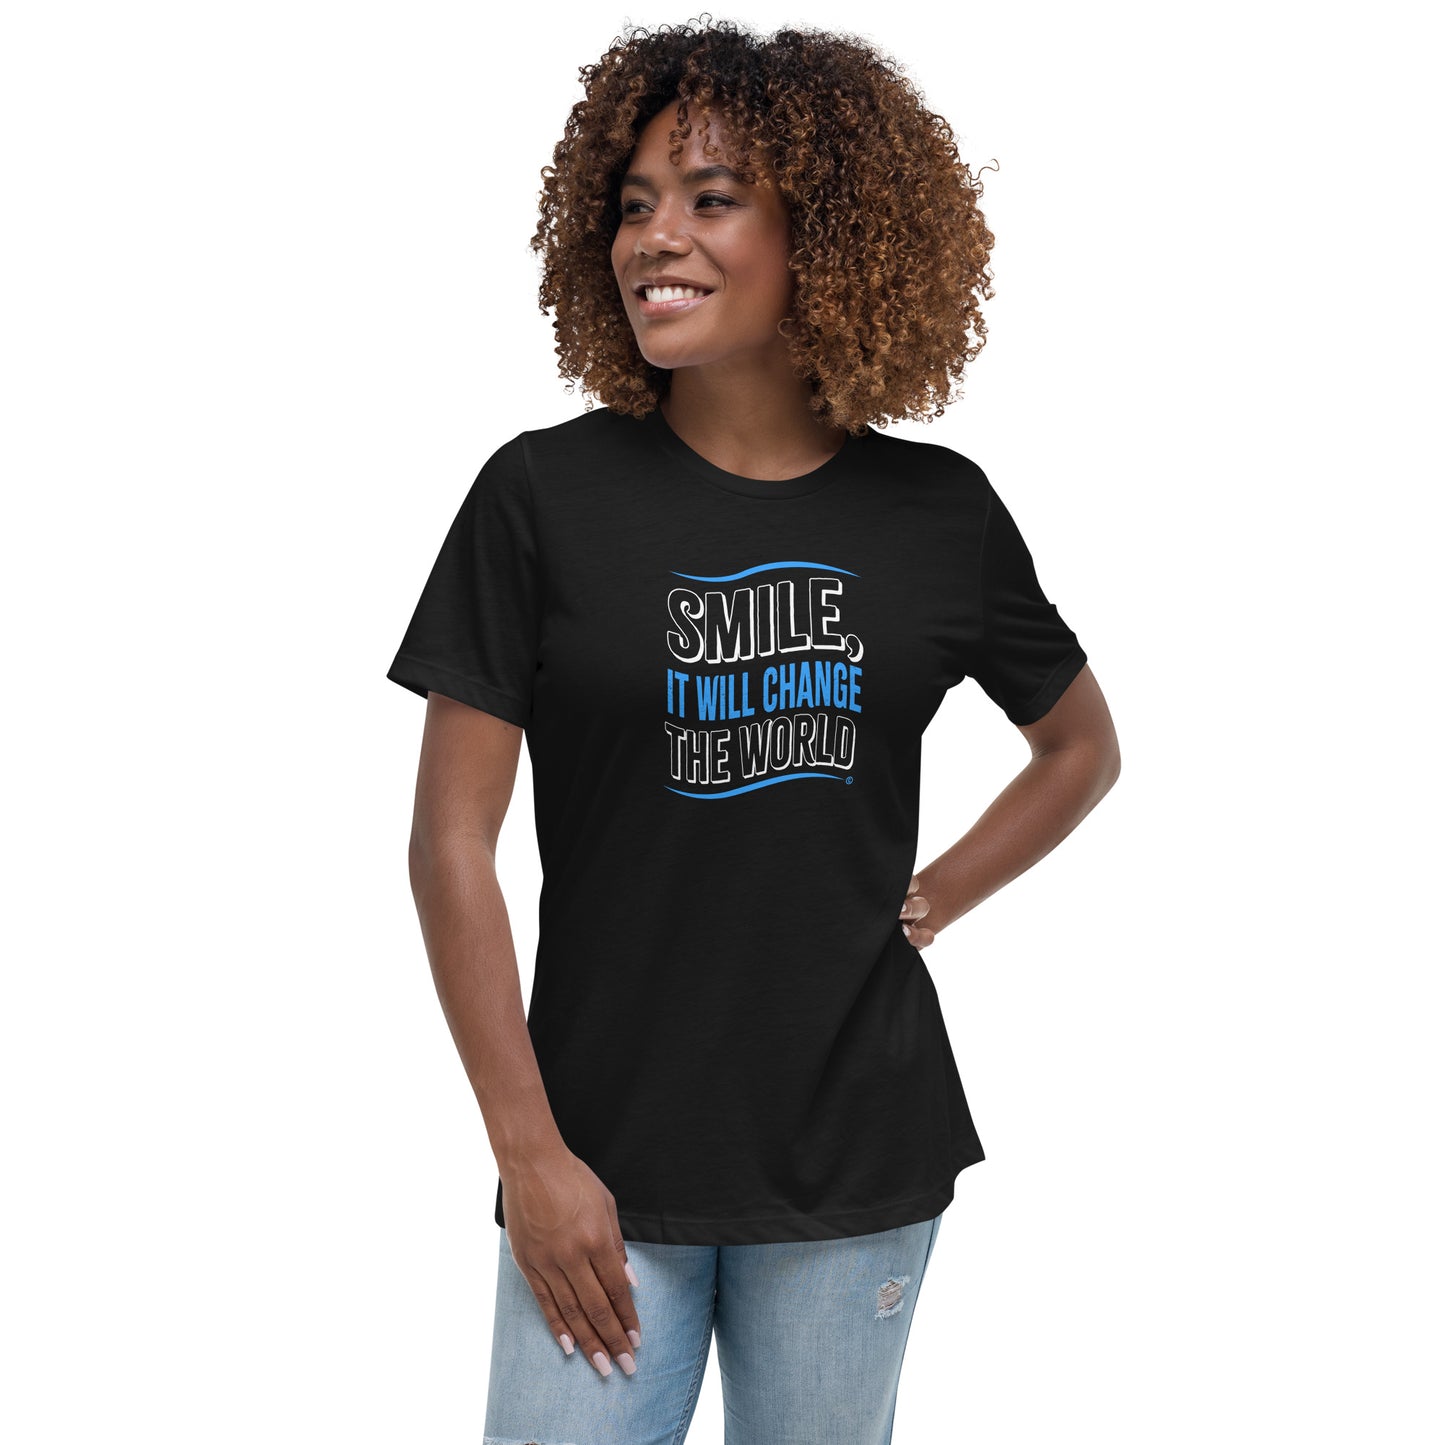 Smile, It will Change the World Women's Tees